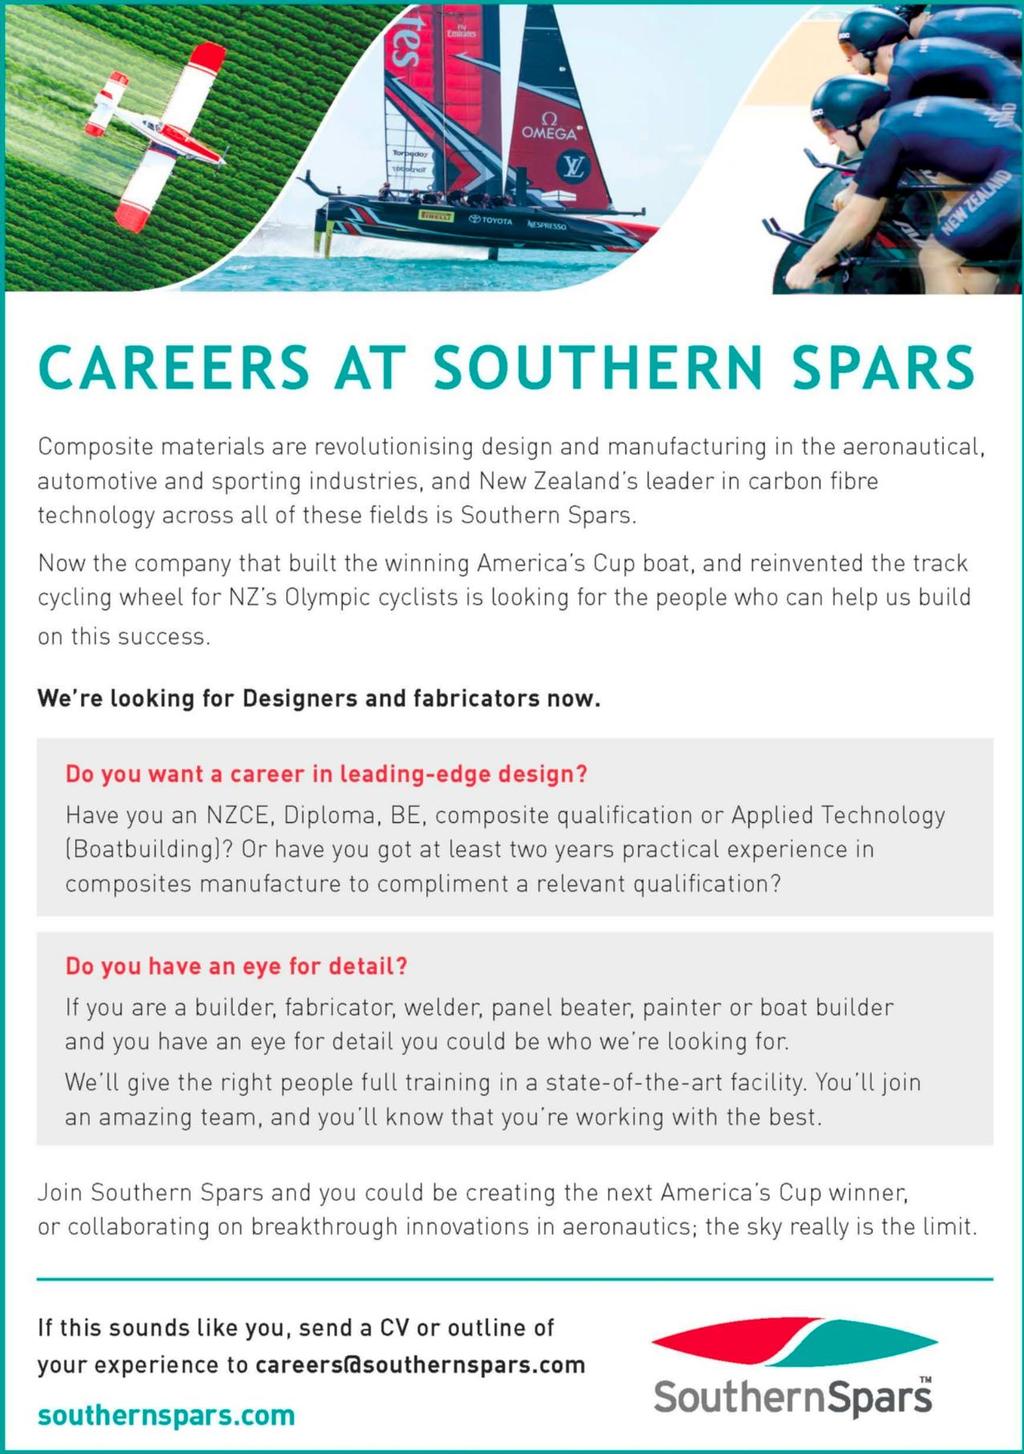 Southern Spars seek Designers and Fabricators © Southern Spars